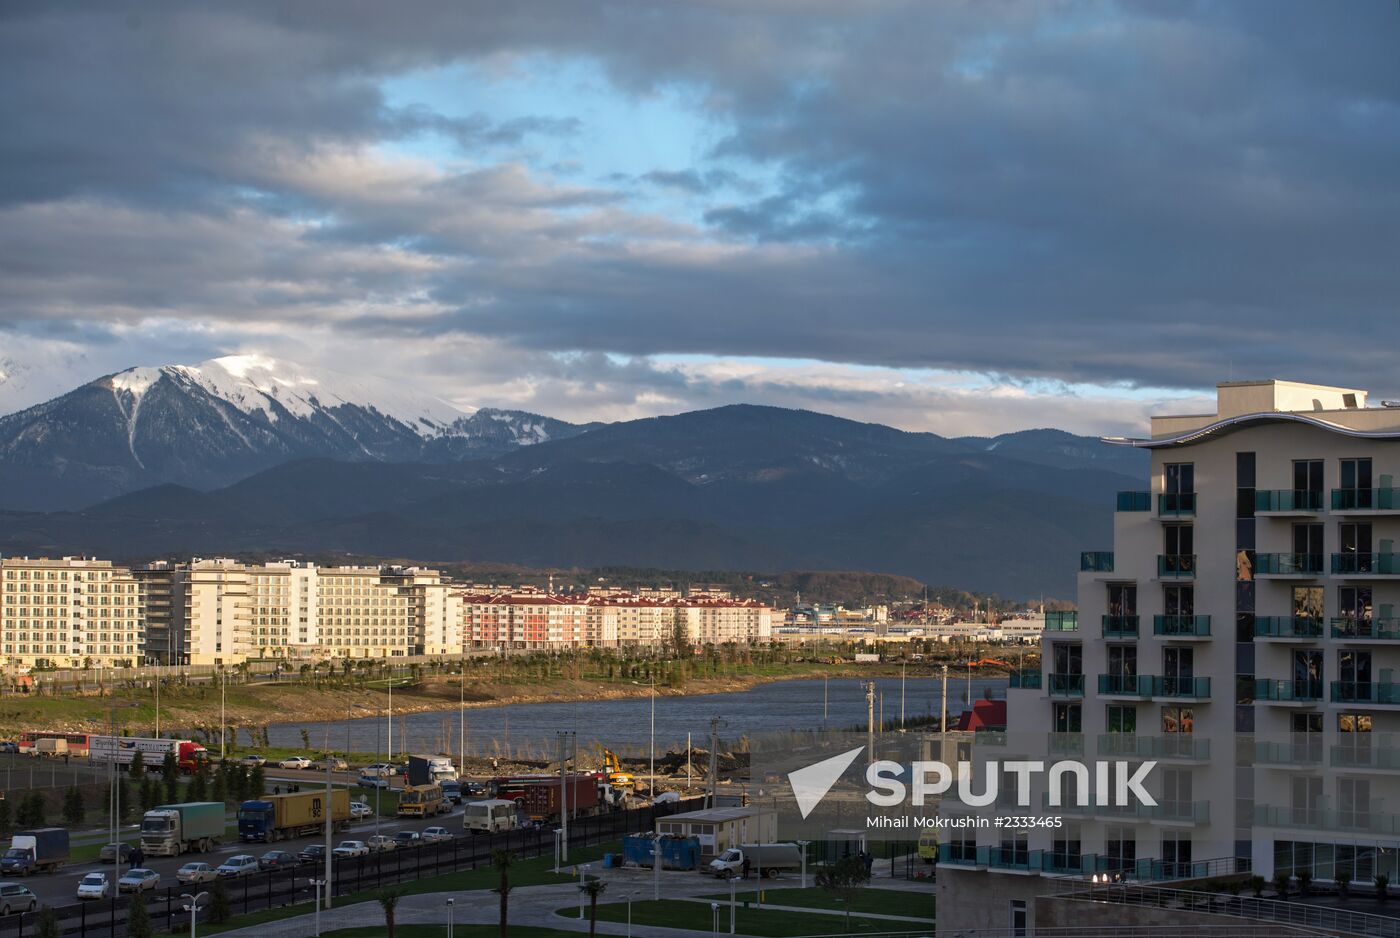 Europe's largest hotel complex opens in Sochi